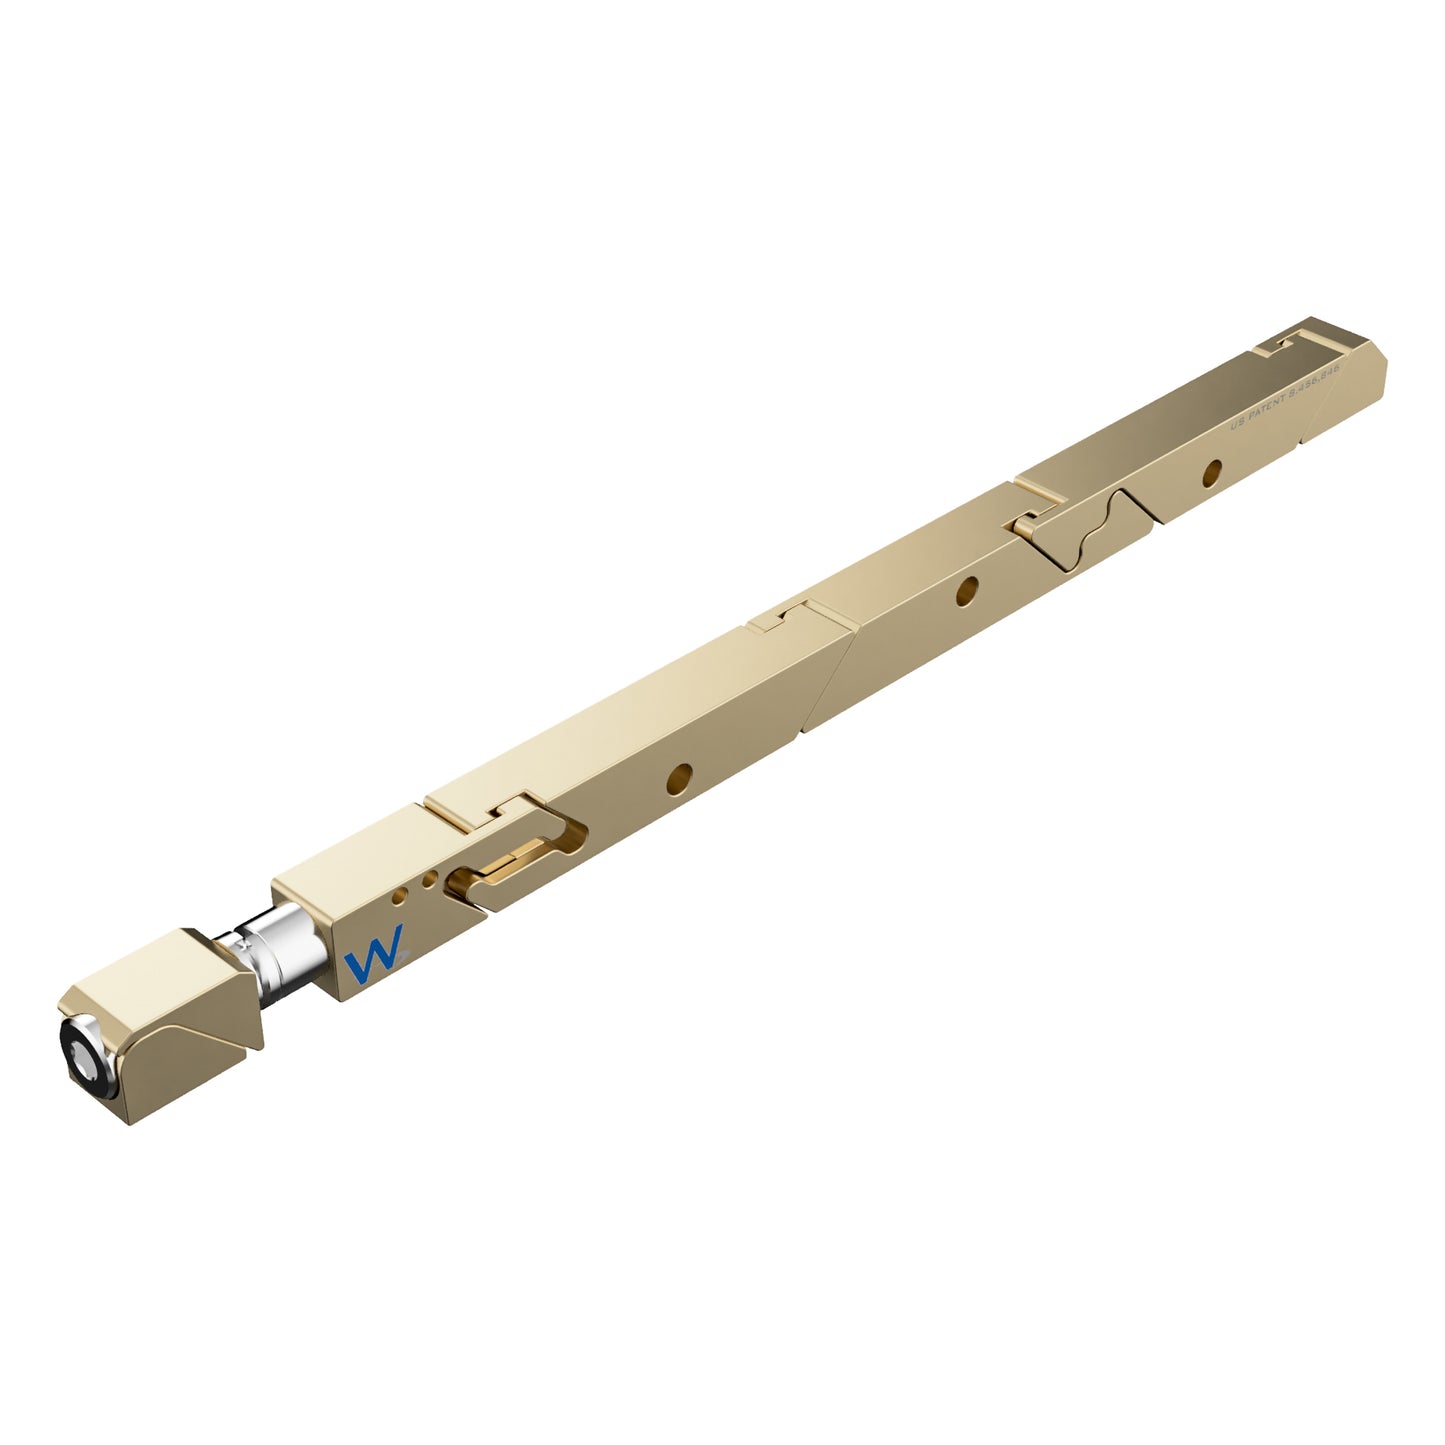 SW7-475-270-250 High Force Wedgelock, segmented long rectulangular hardware component, Gold Chemical Film Finish